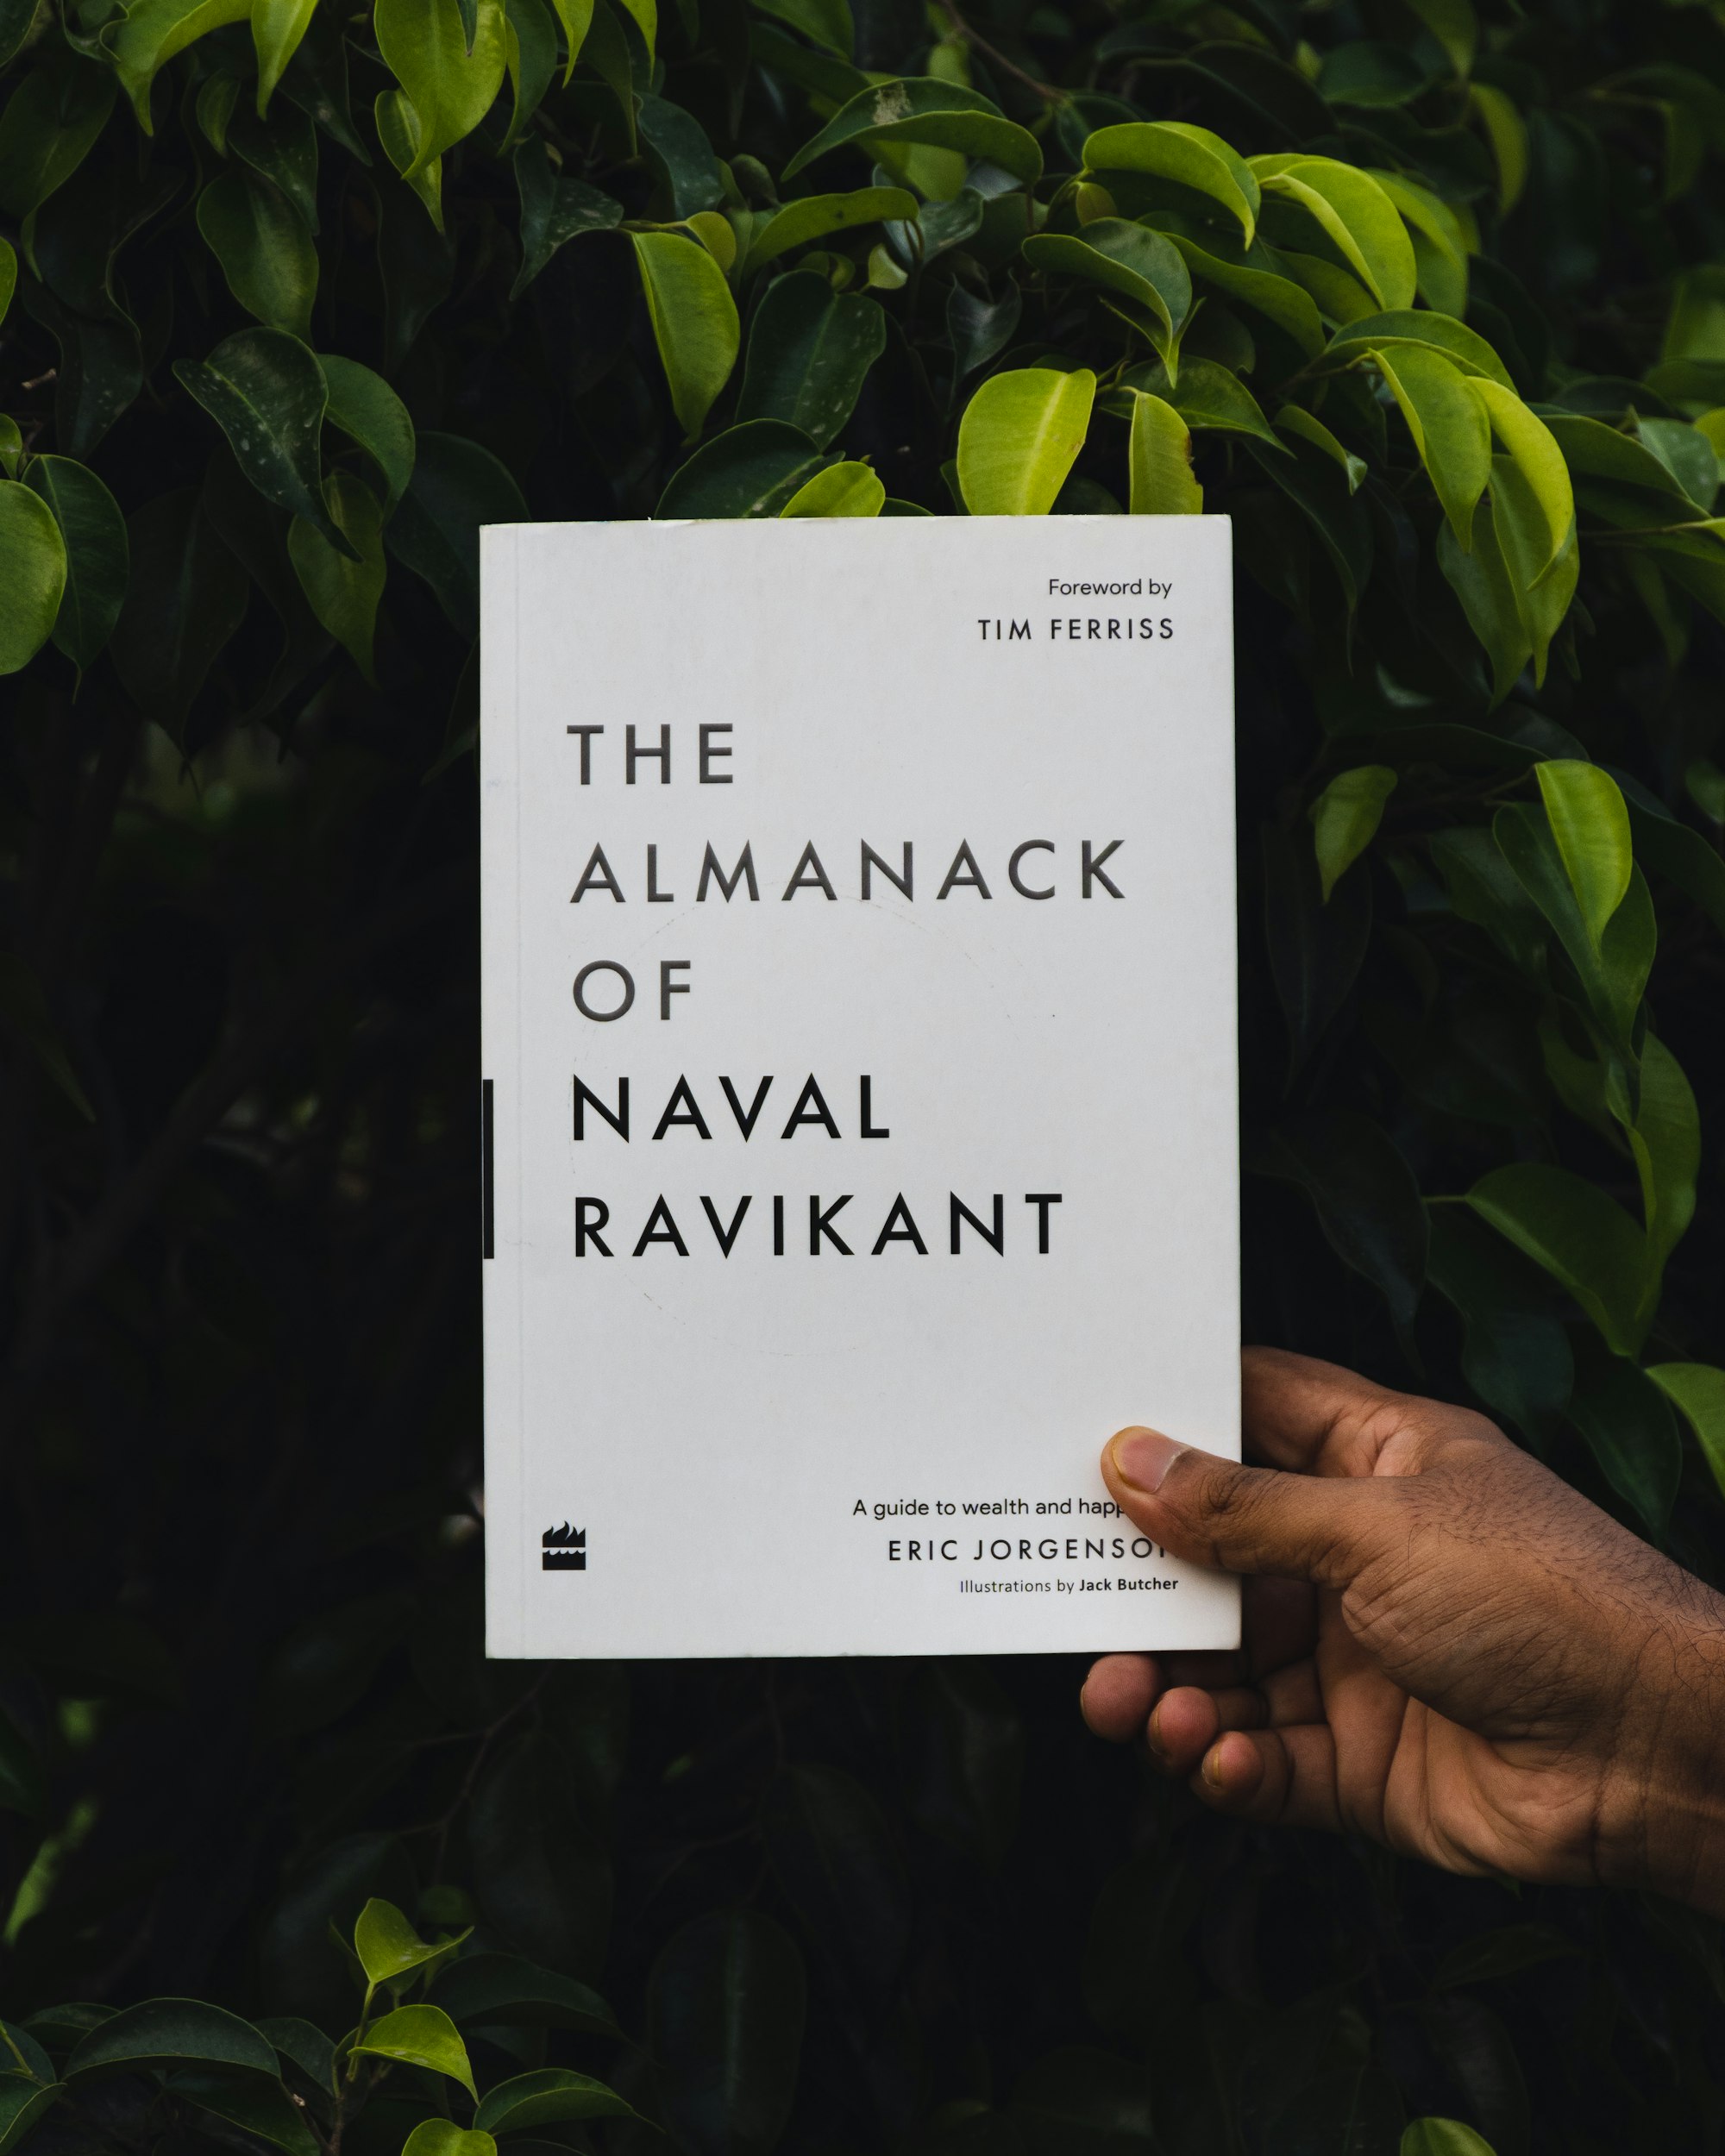 Picture of The Almanack of Naval Ravikant before leaves.

Discover all my photography work: https://fueler.io/anikman98